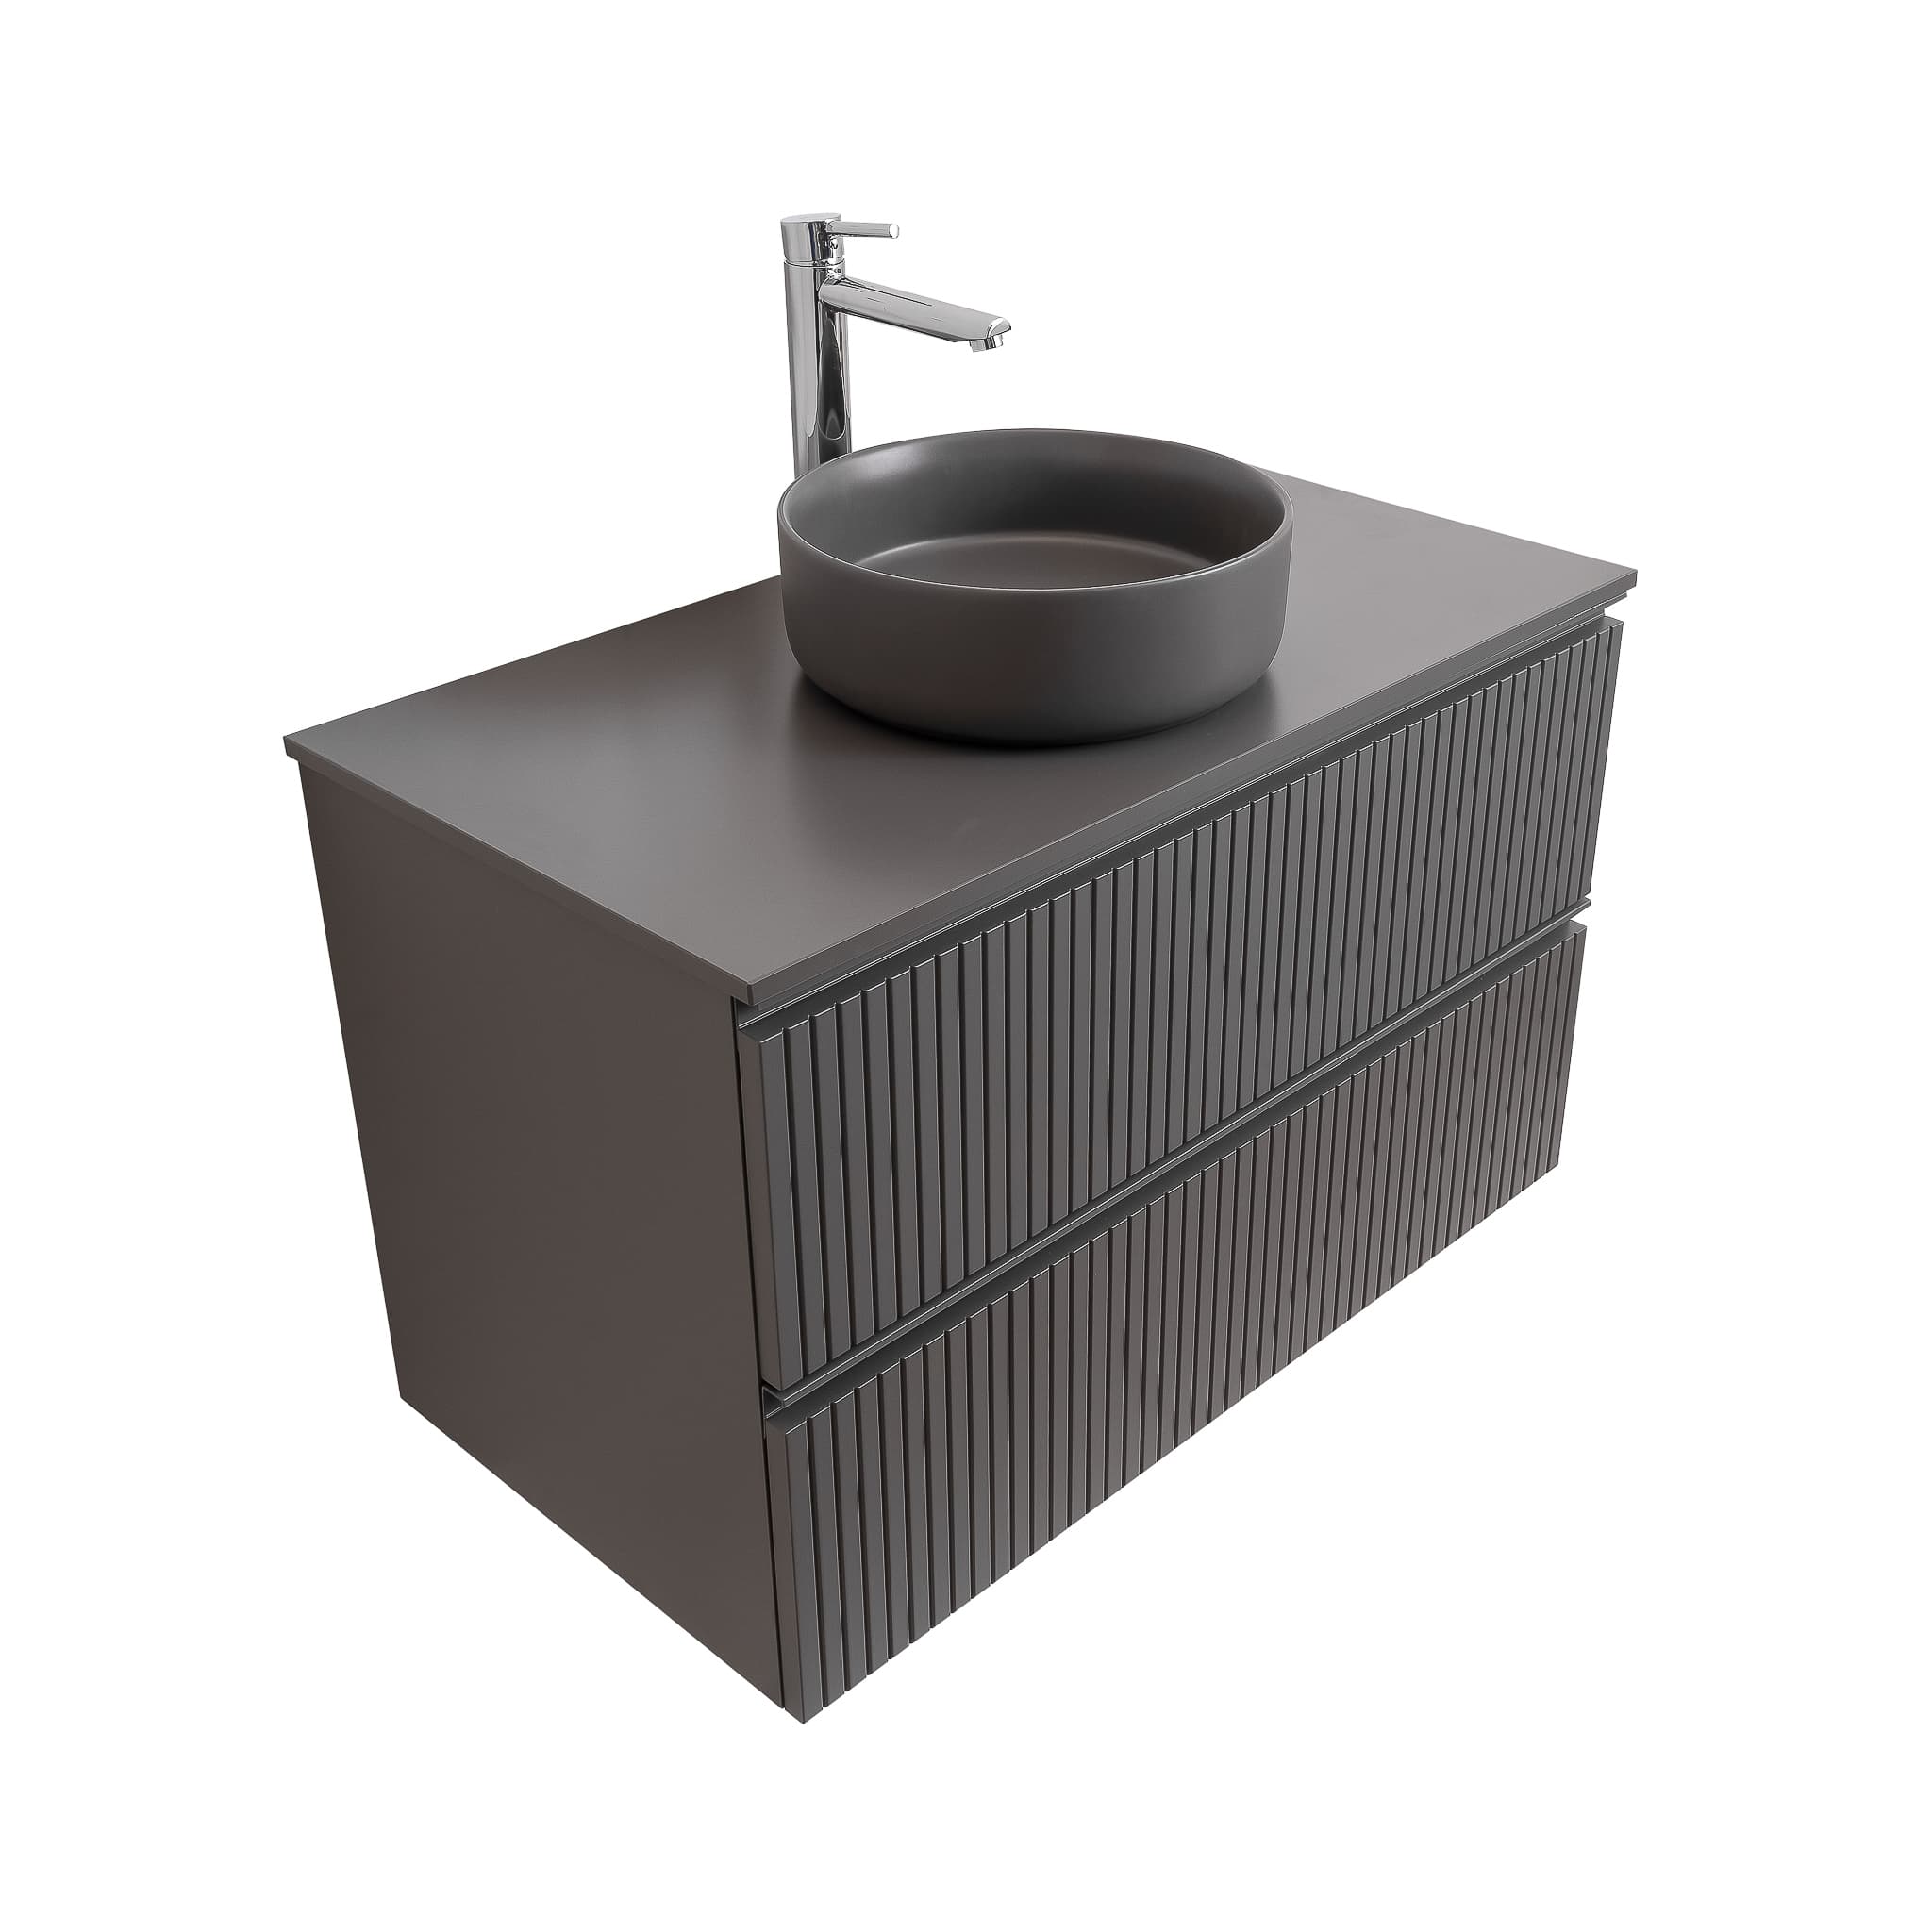 Ares 39.5 Matte Grey Cabinet, Ares Grey Ceniza Top And Ares Grey Ceniza Ceramic Basin, Wall Mounted Modern Vanity Set